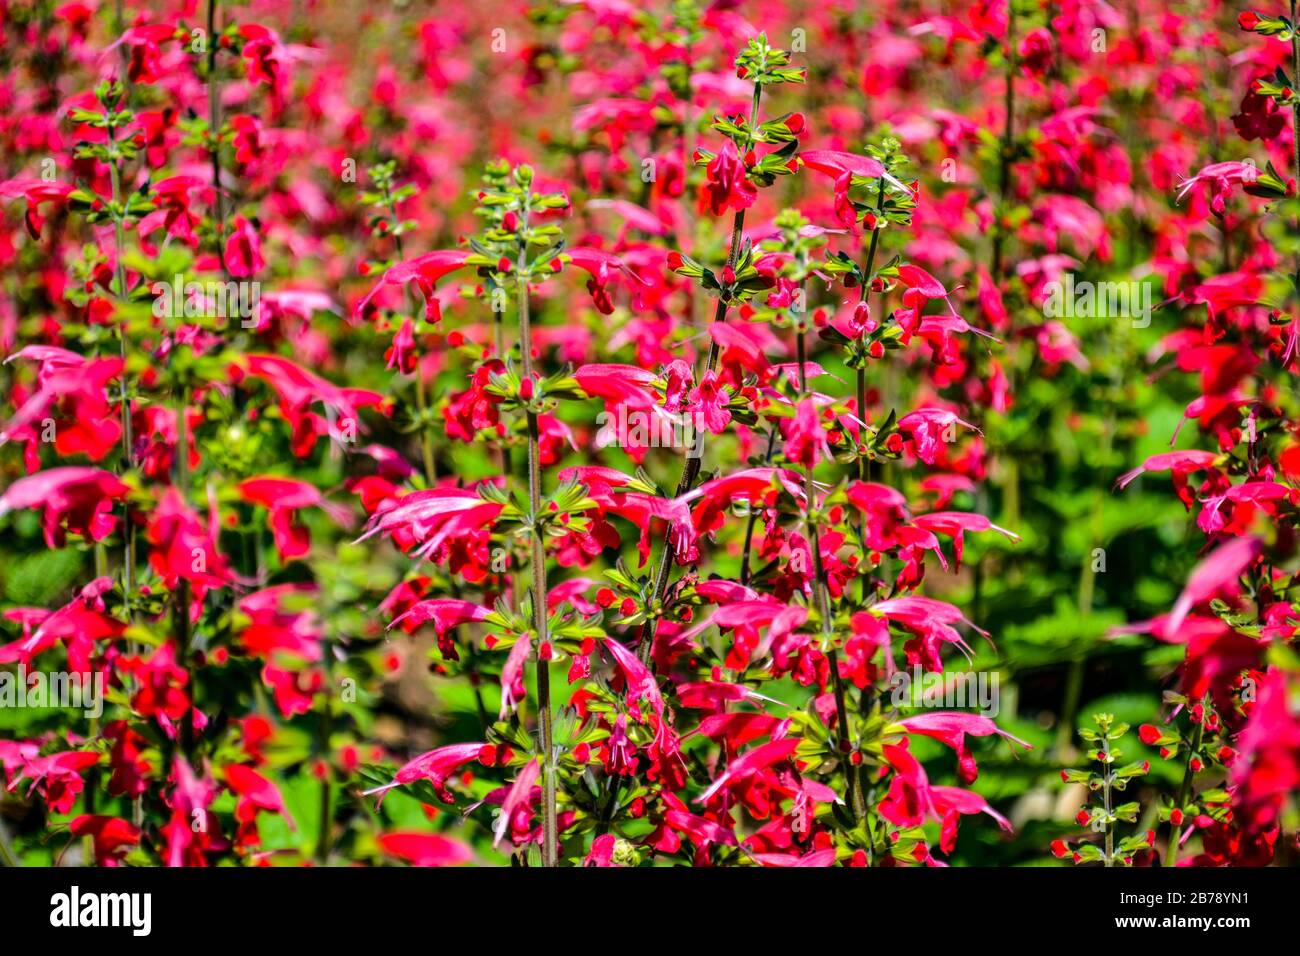 Red salvia flowers in bloom, natural pattern Stock Photo